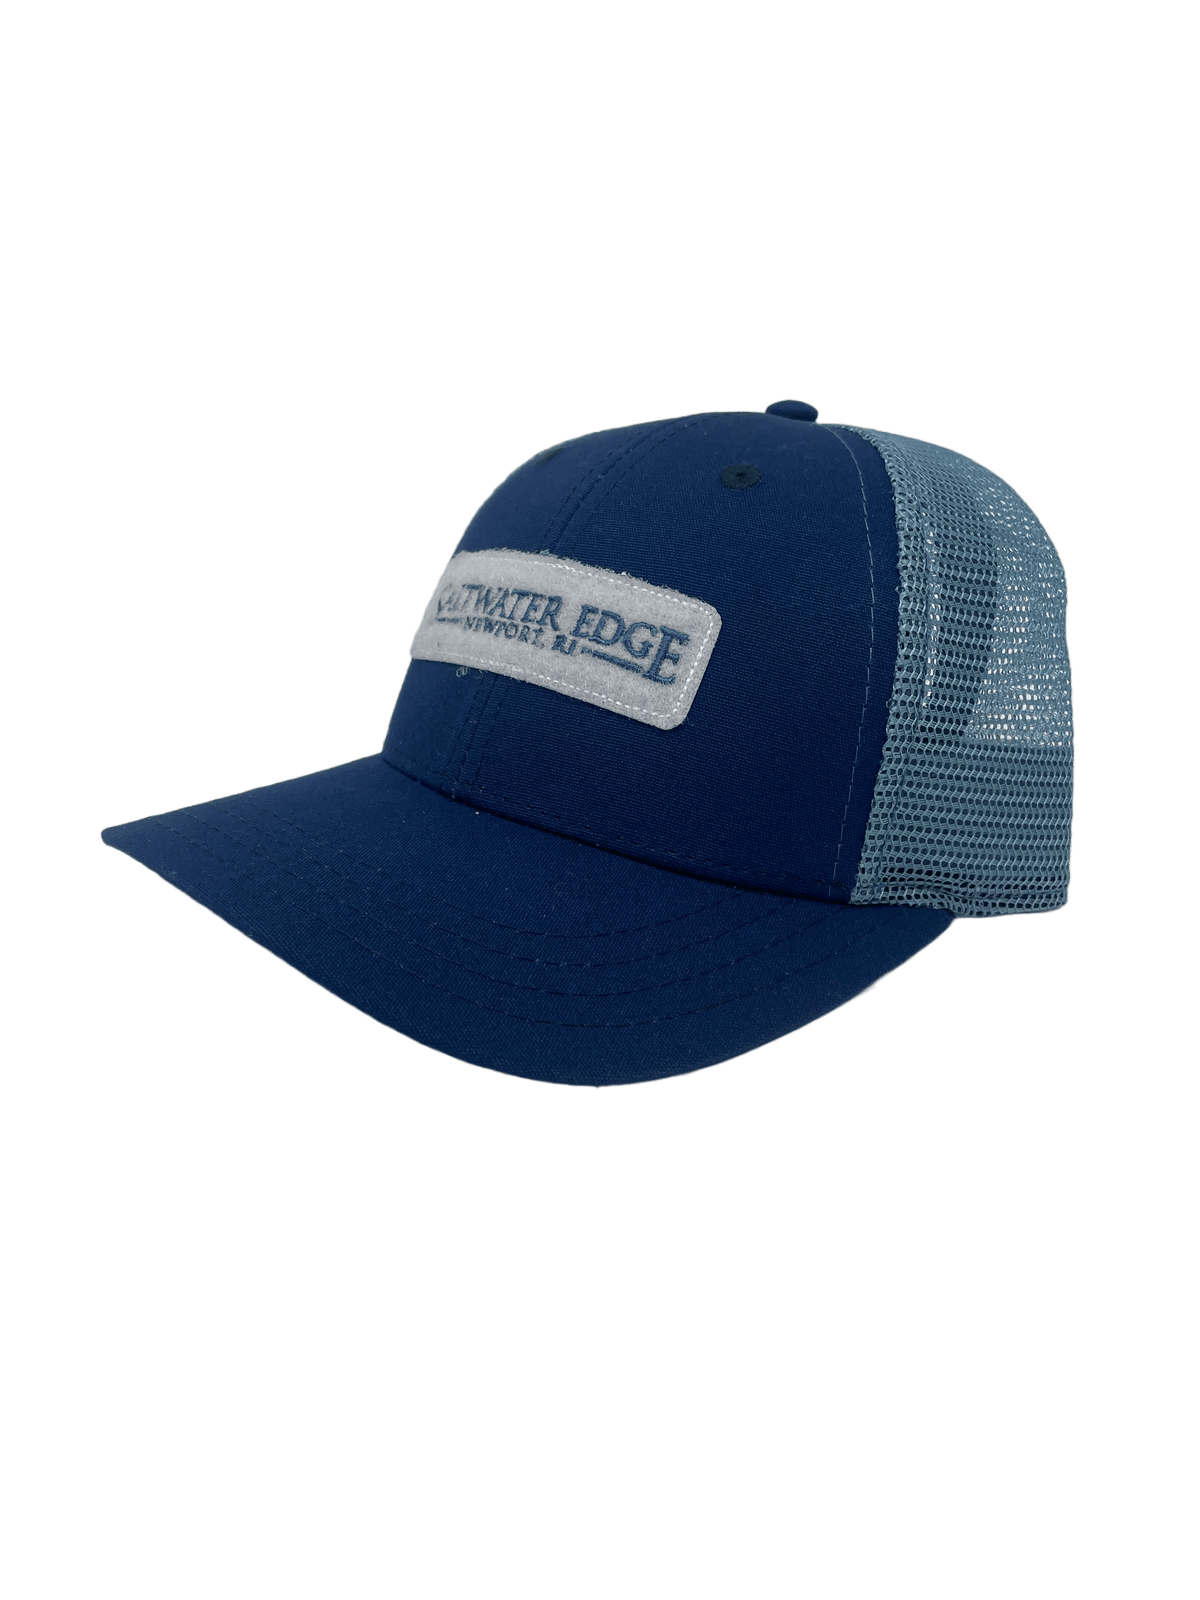 The Saltwater Edge Thames Street Patch Hat Navy Blue Mesh